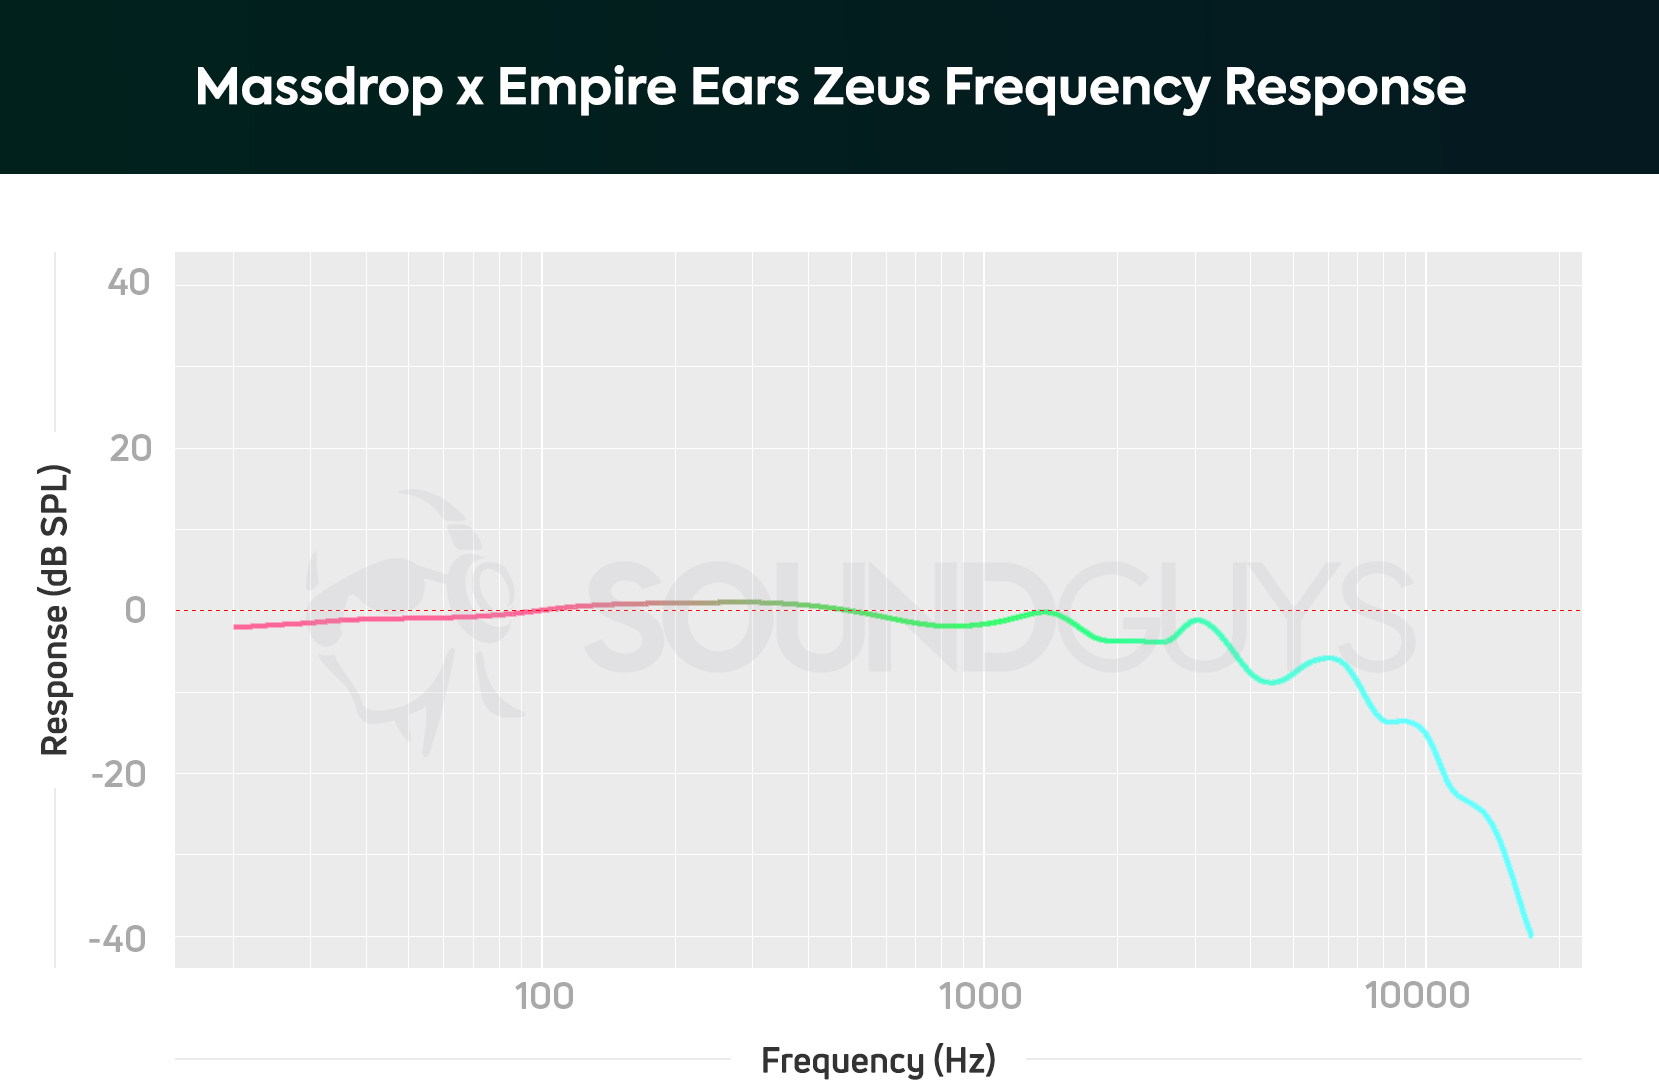 A chart depicting the Massdrop x Empire Ears Zeus earbuds' frequency response.